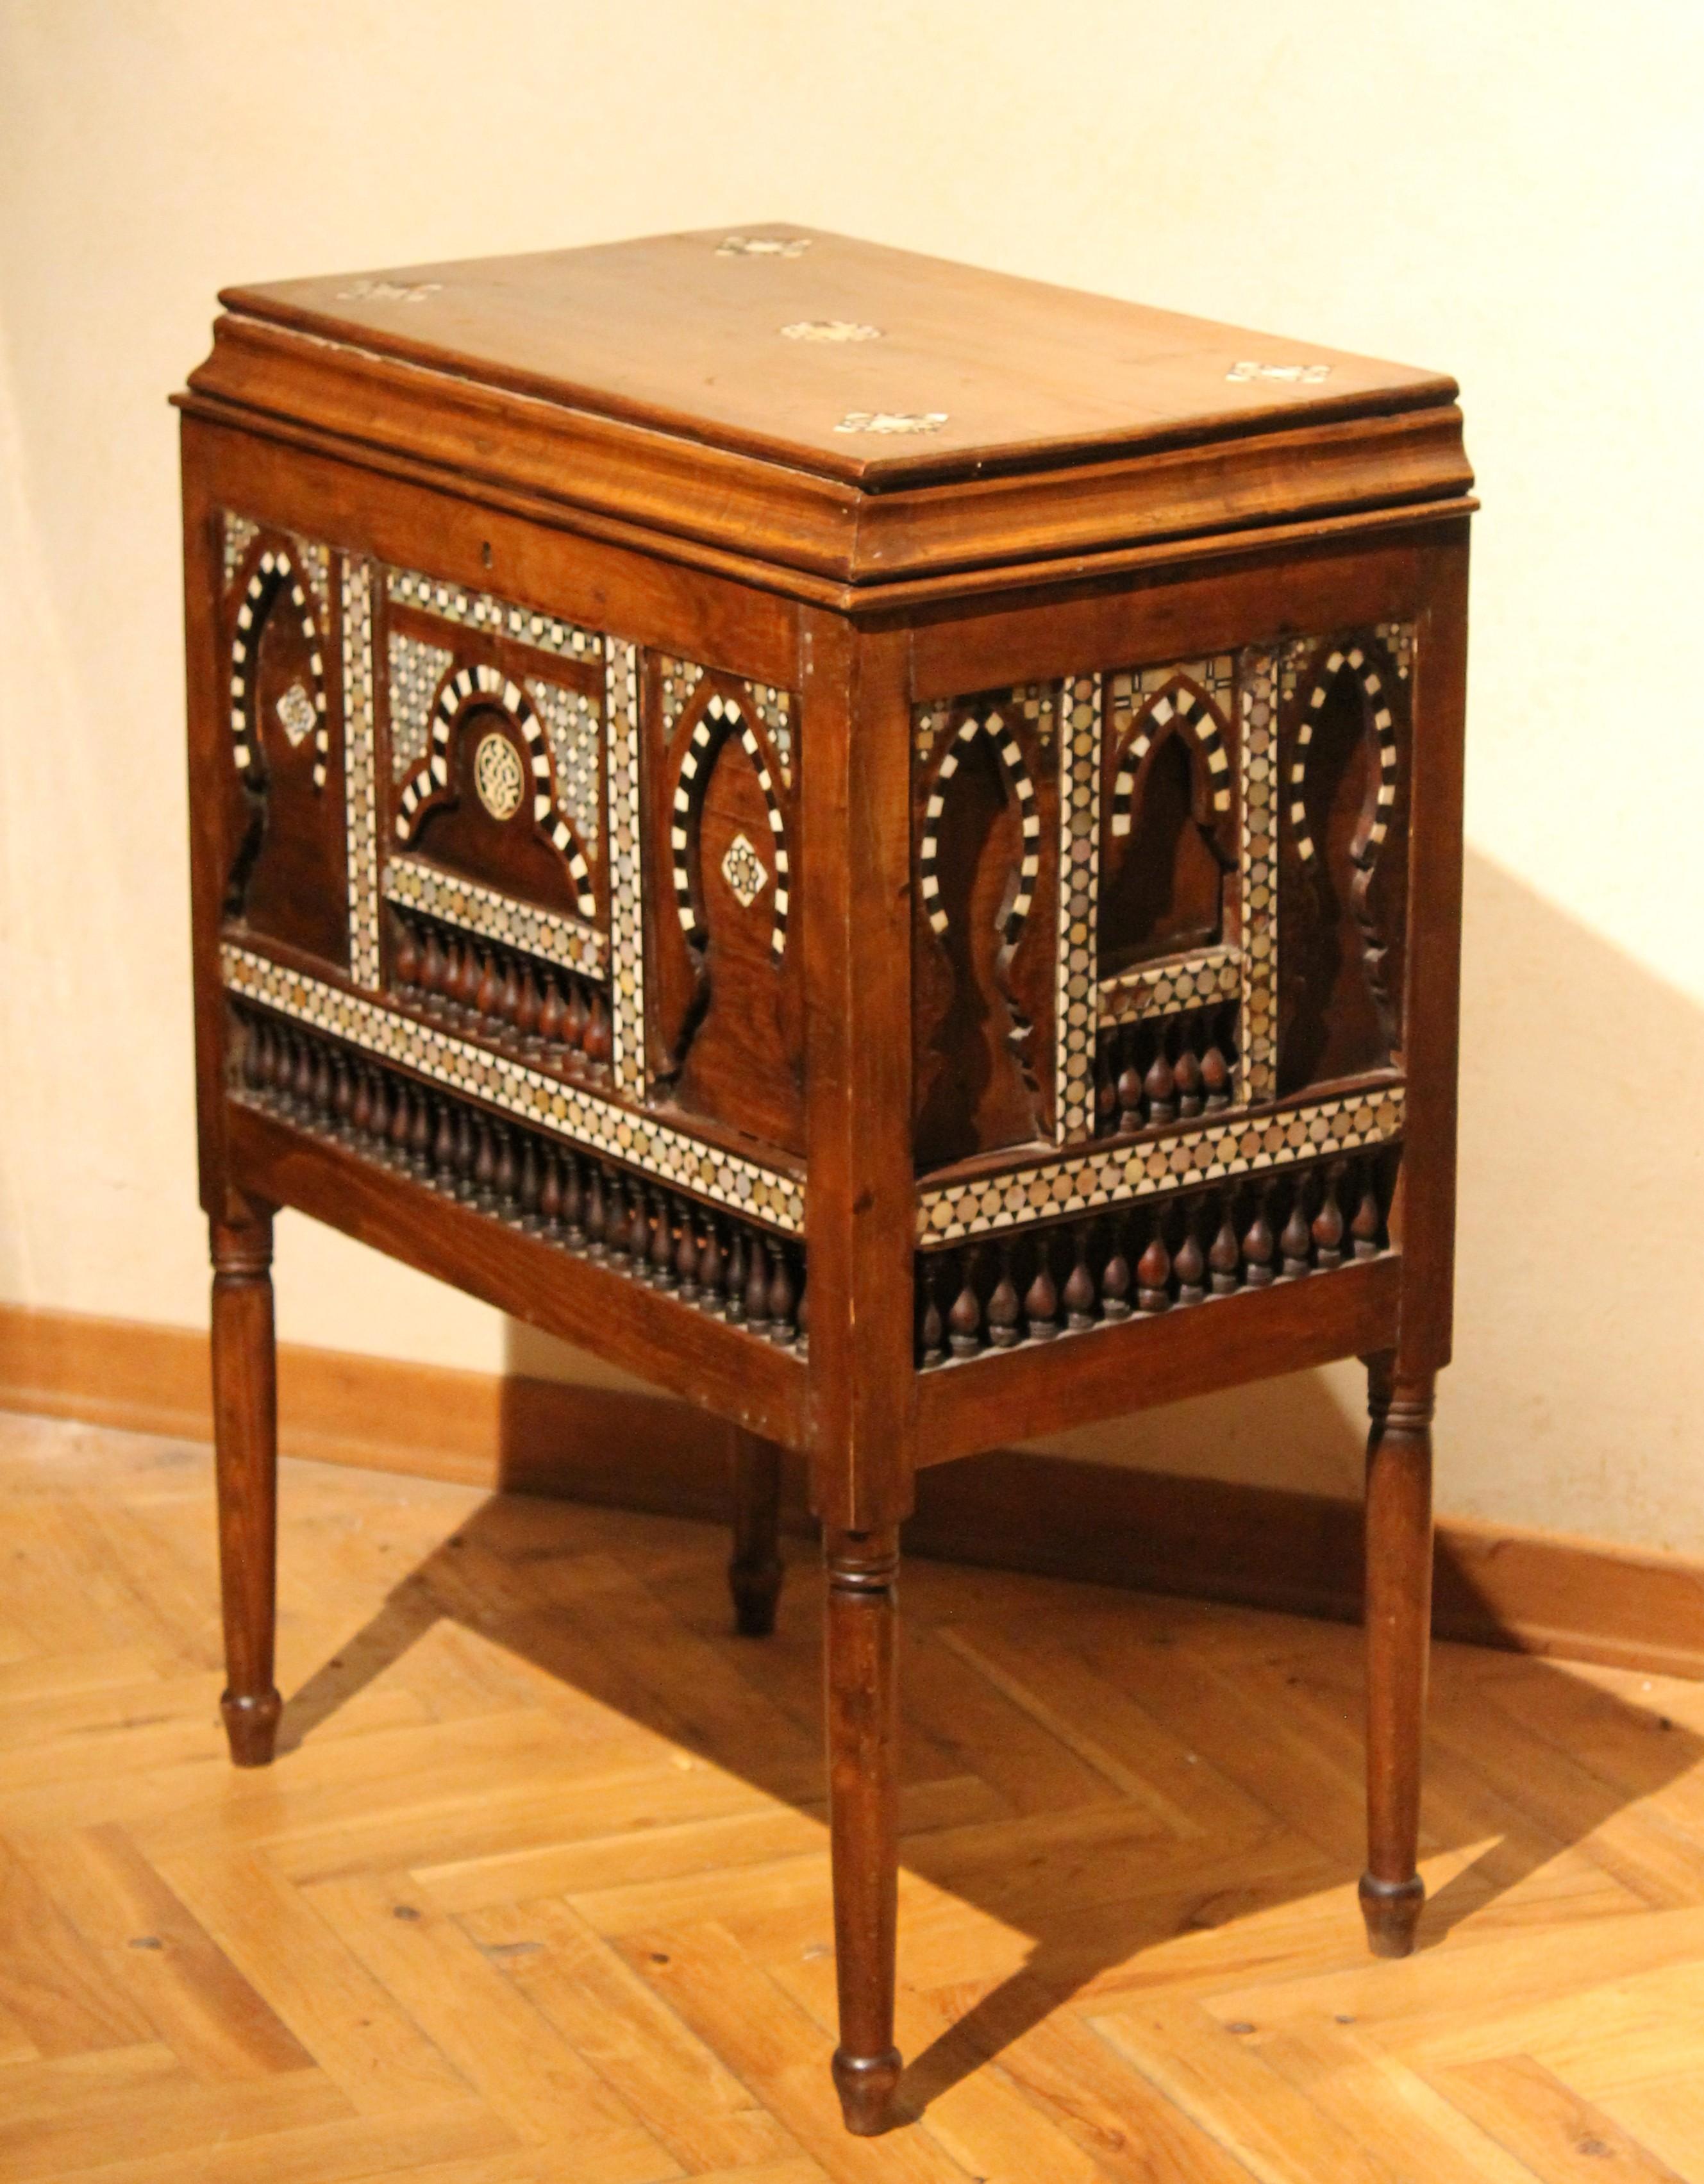 For Moorish vibes lovers this small early 20th century architectural cabinet with opening top will bring an arabesque touch to your decor.
This small Moroccan or Middle Eastern chest of drawers in the style of Carlo Bugatti - perfect as a side